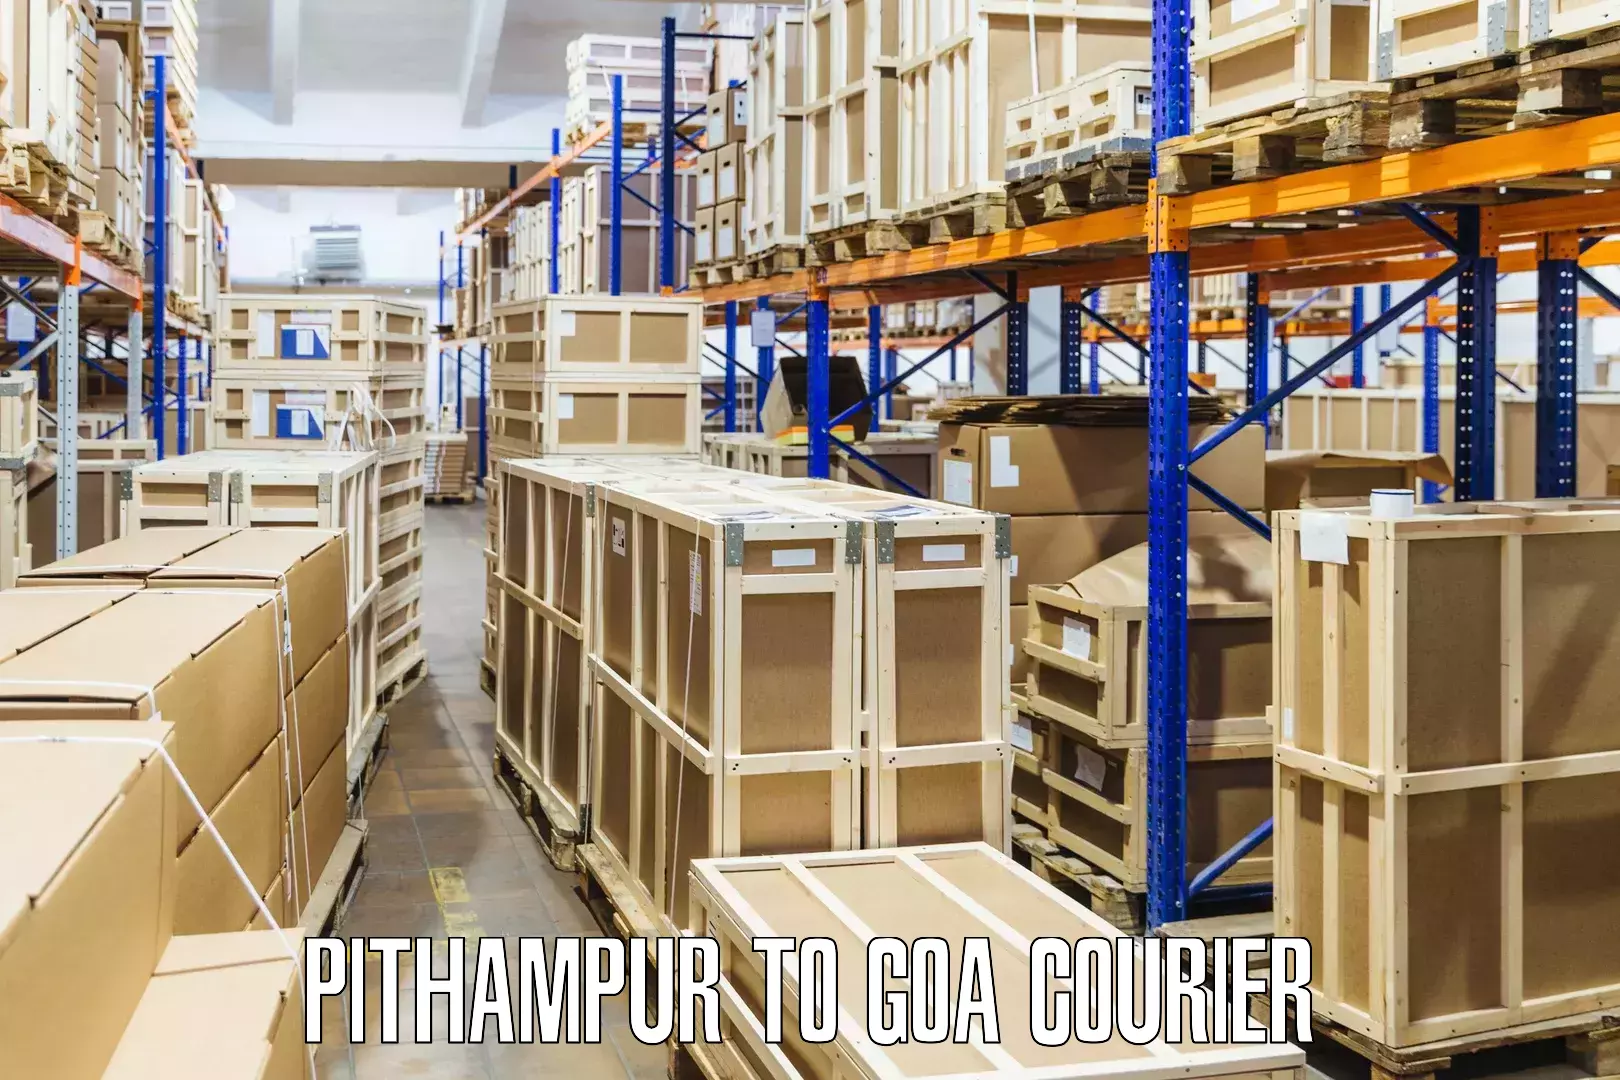 Cost-effective courier options Pithampur to South Goa